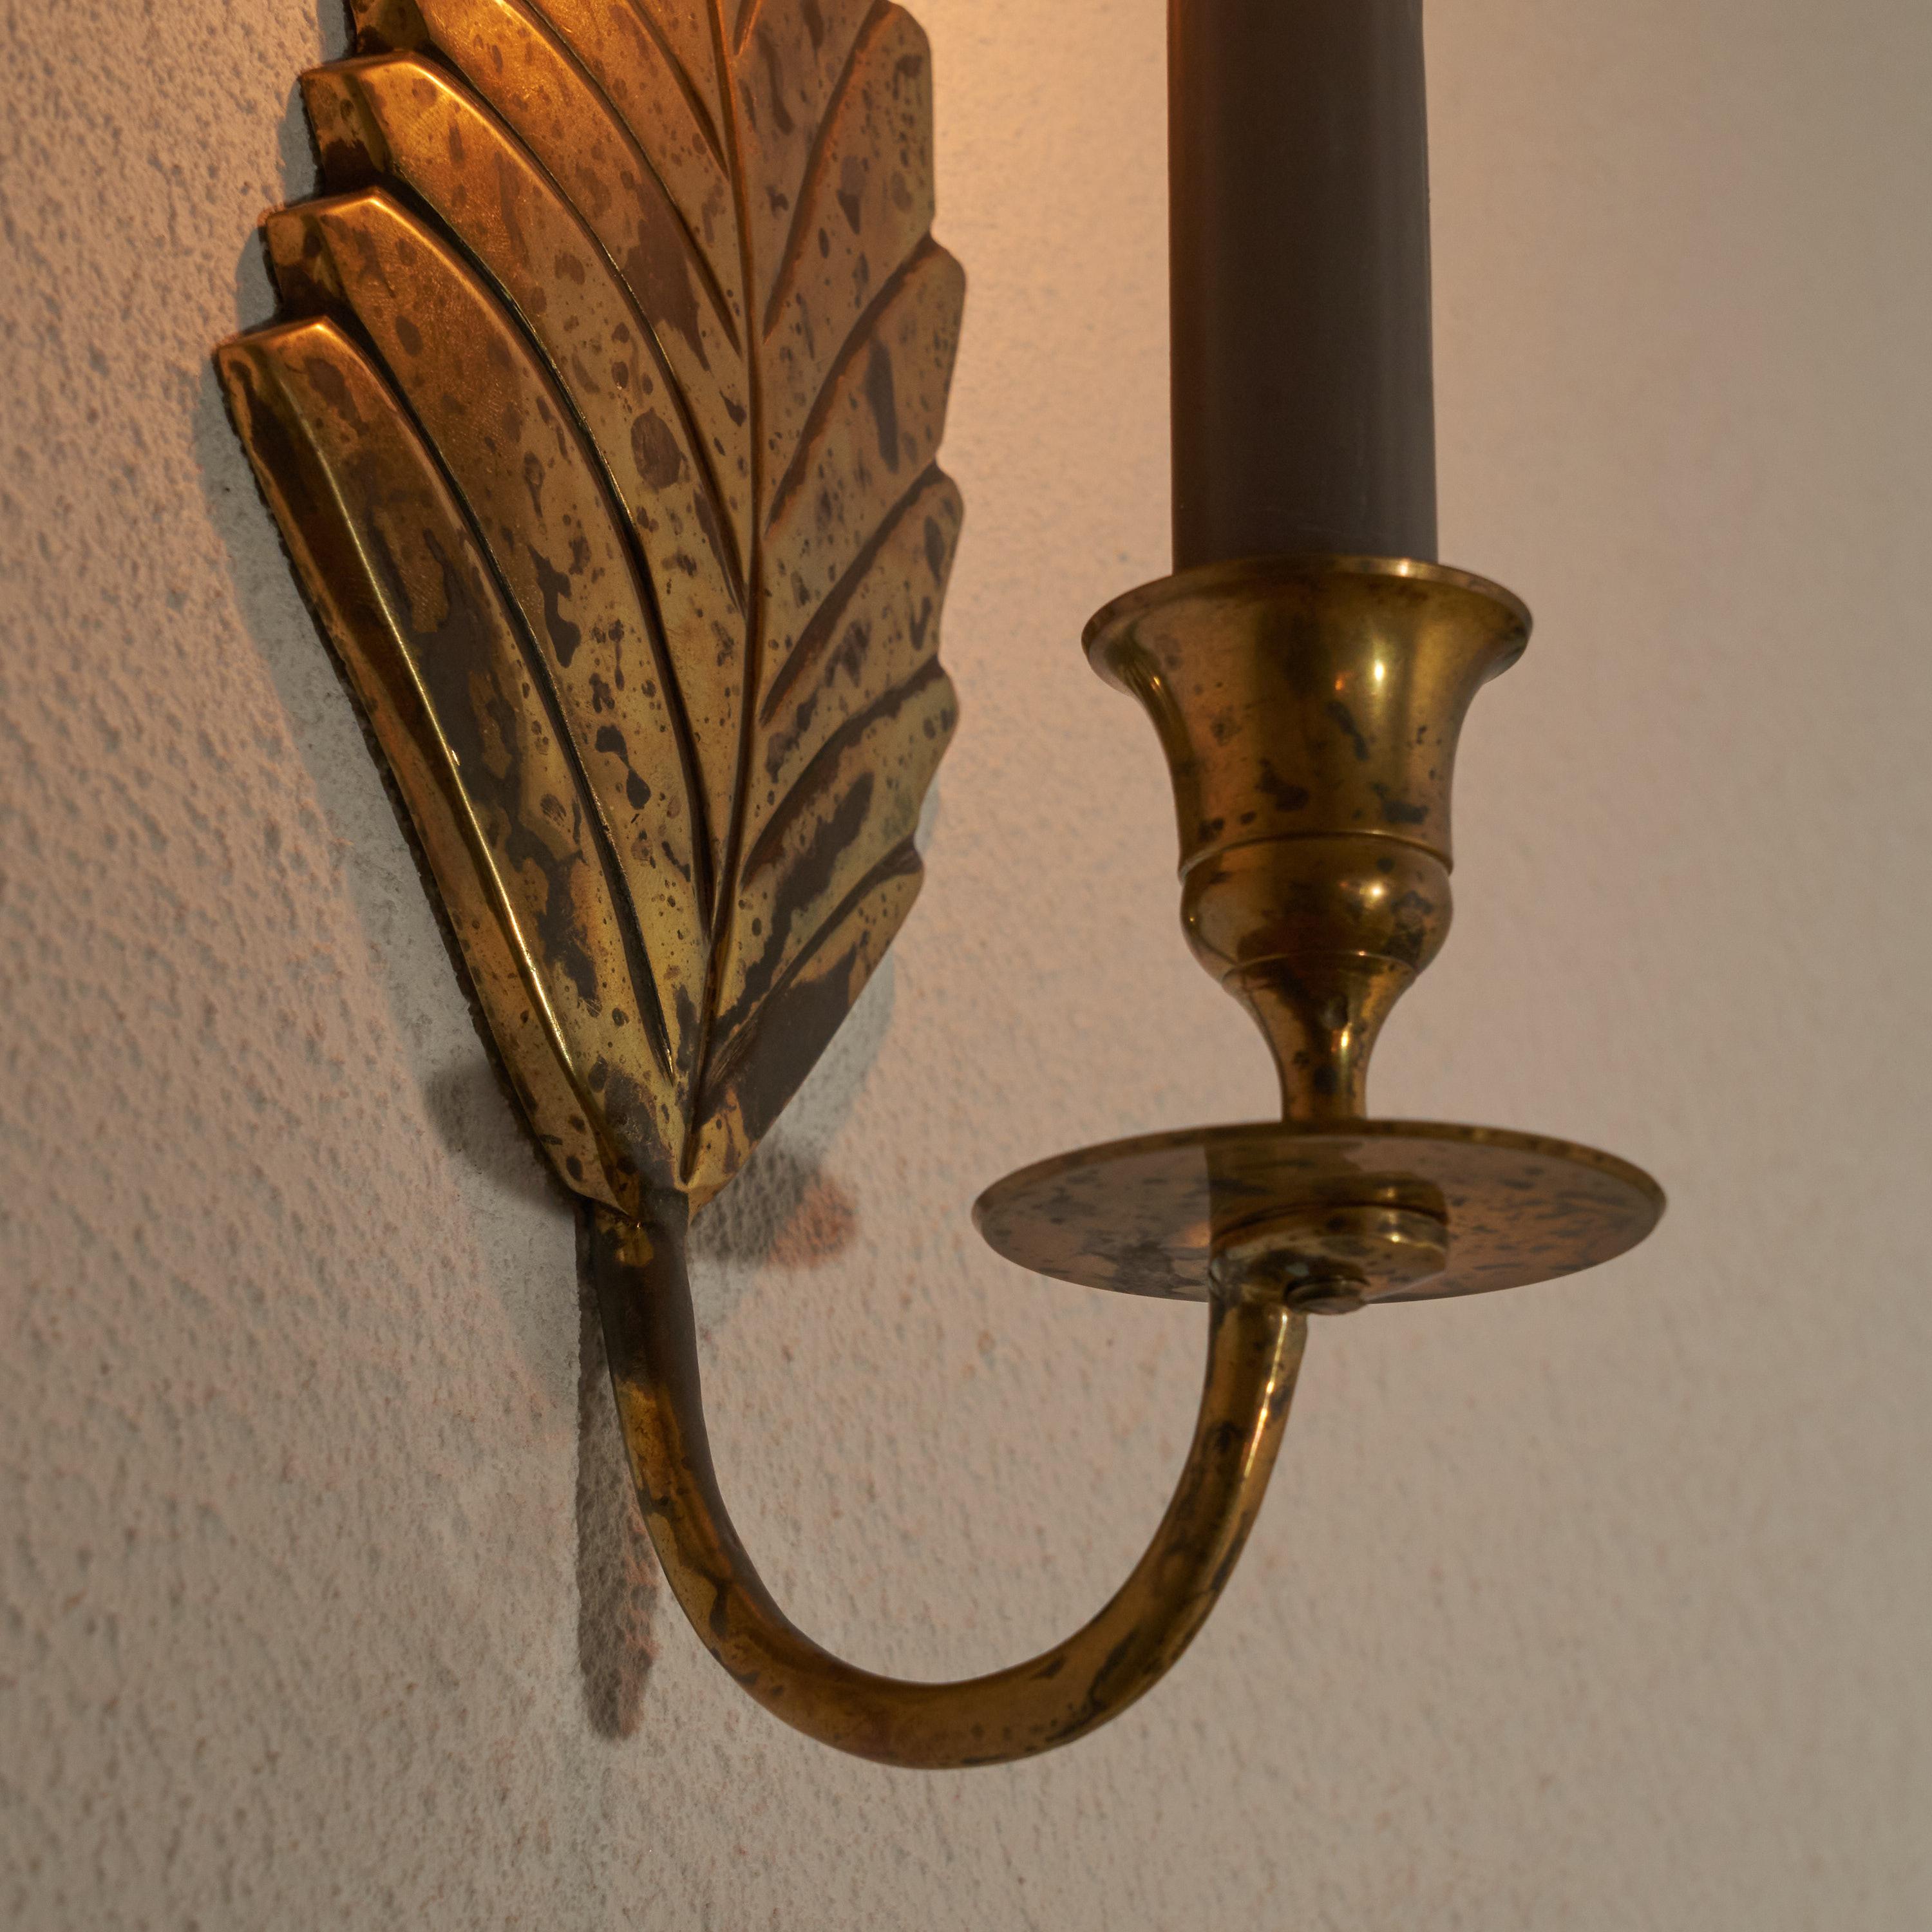 Leaf Shaped Candle Sconce in Patinated Brass 1970s For Sale 1